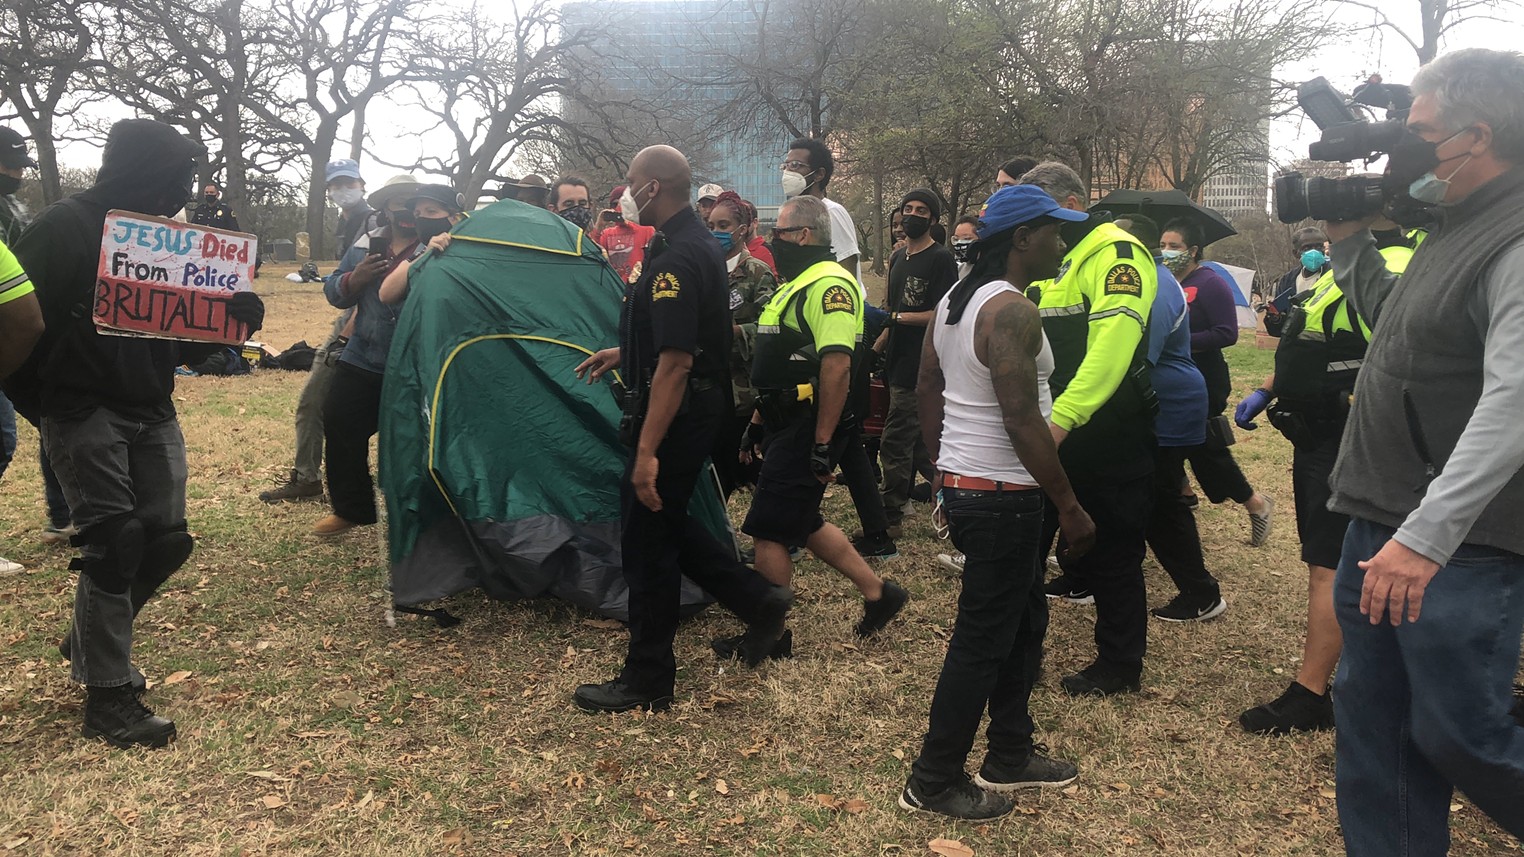 Dallas Prepares for ‘Armed Resistance’ During Local Homeless Encampment Sweeps